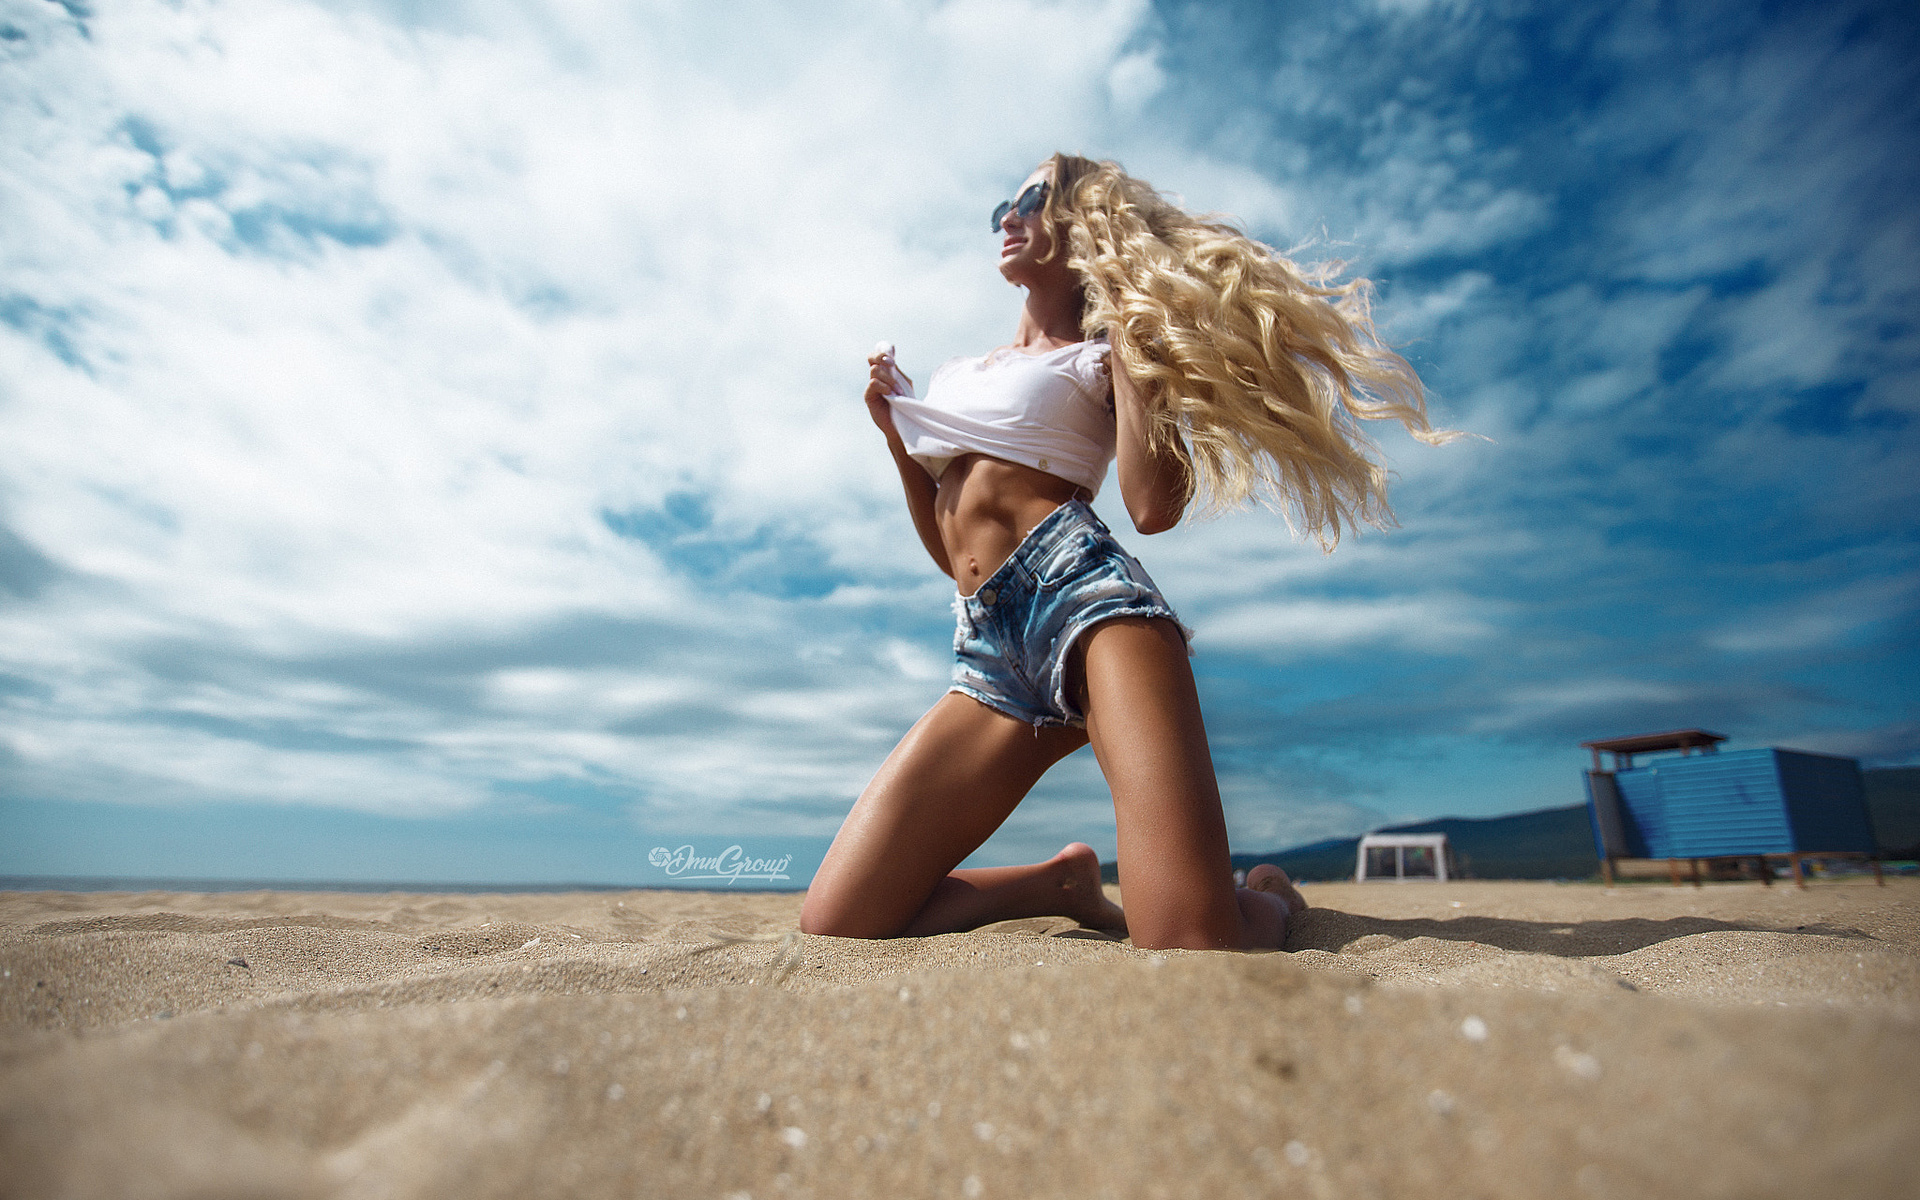 women, blonde, belly, sand, t-shirt, tanned, jean shorts, sky, clouds, sunglasses, kneeling